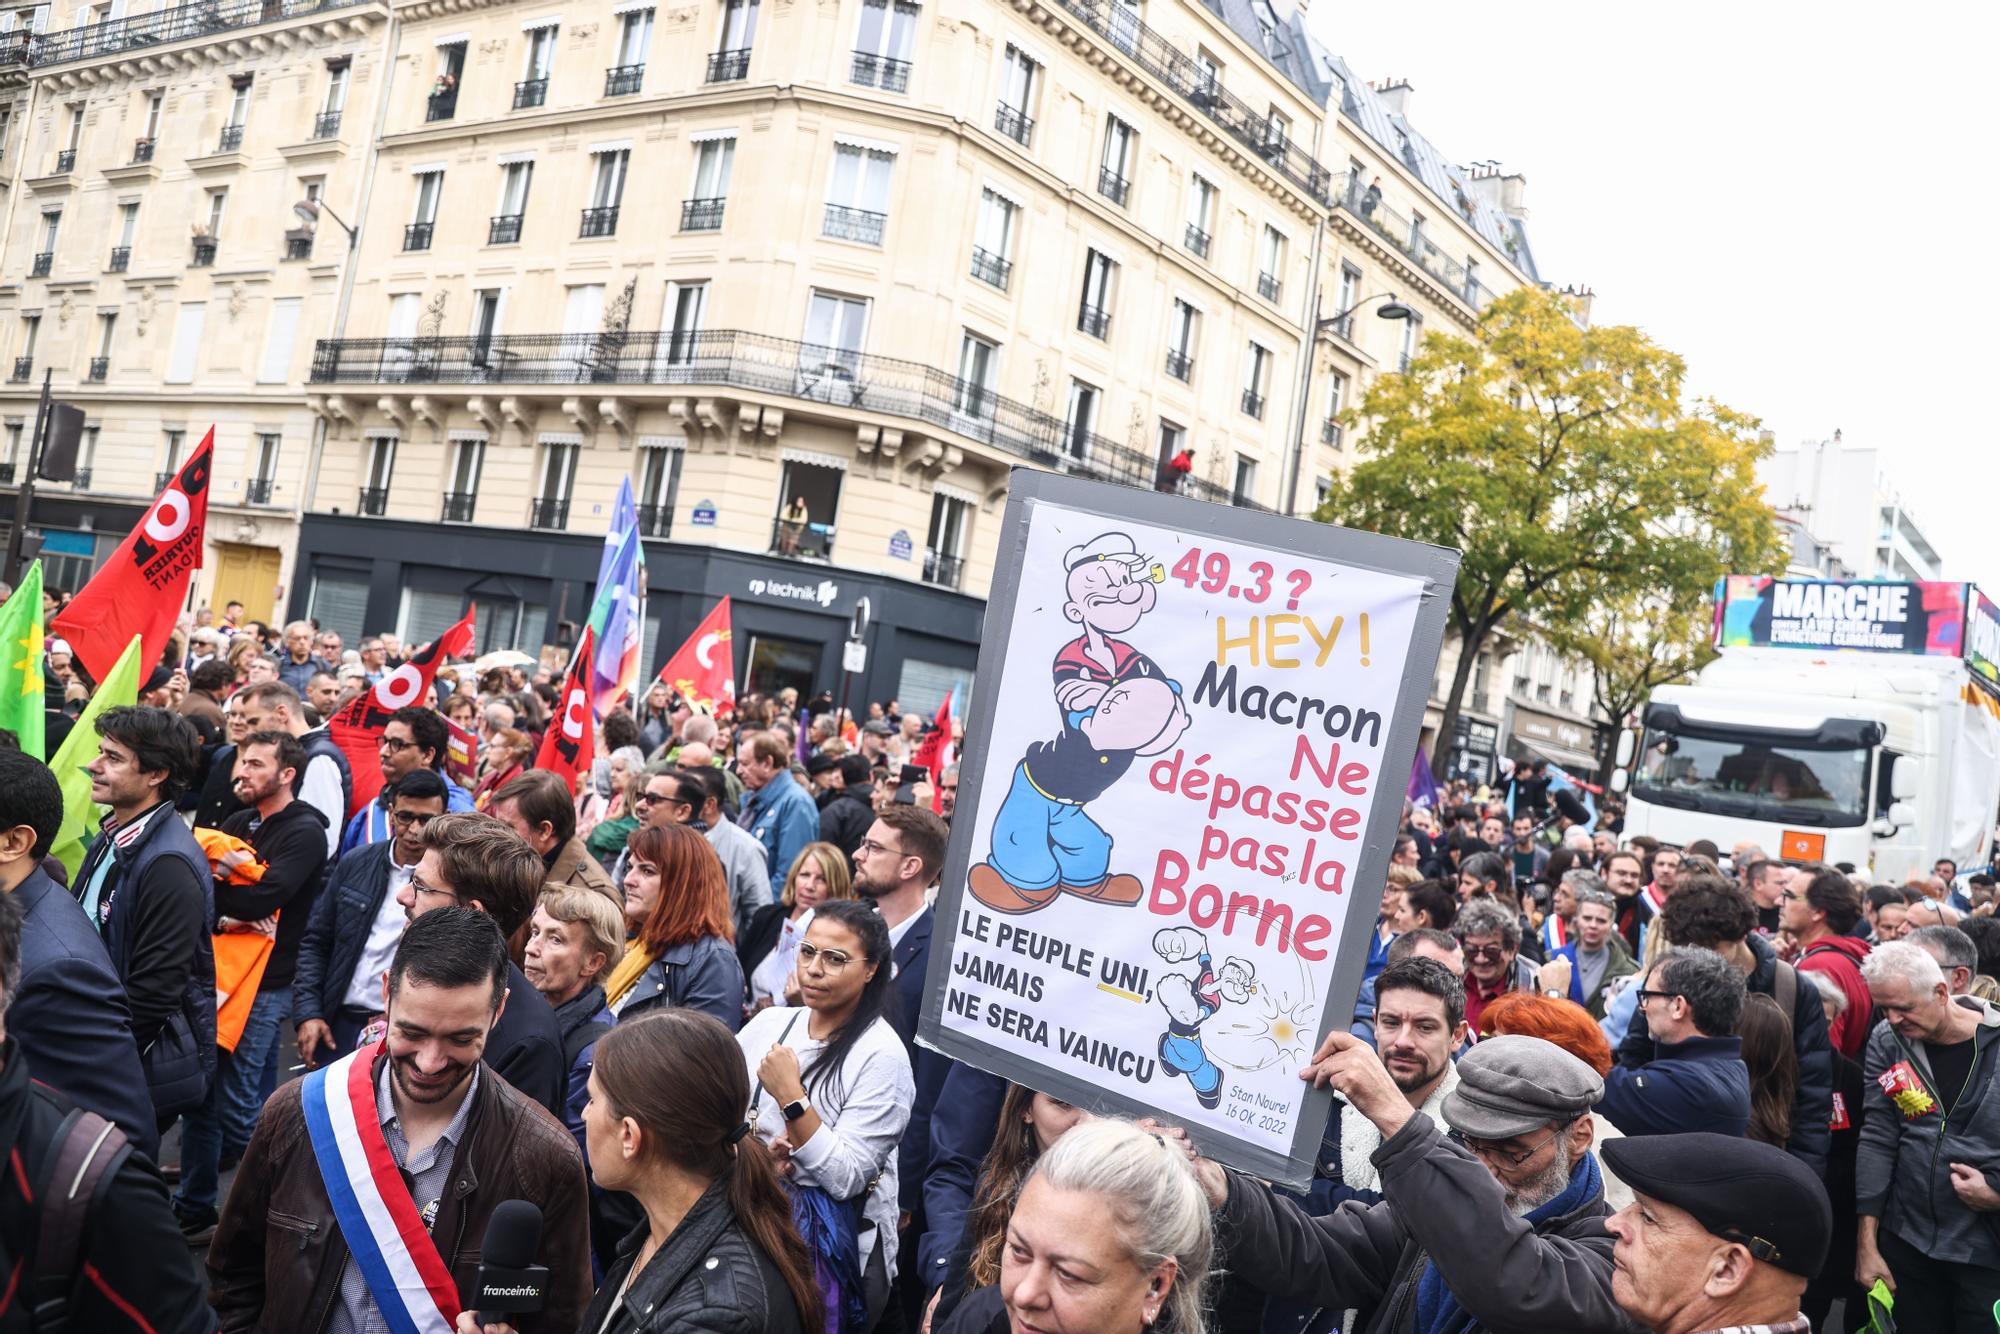 French left parties call for a rally against rising prices